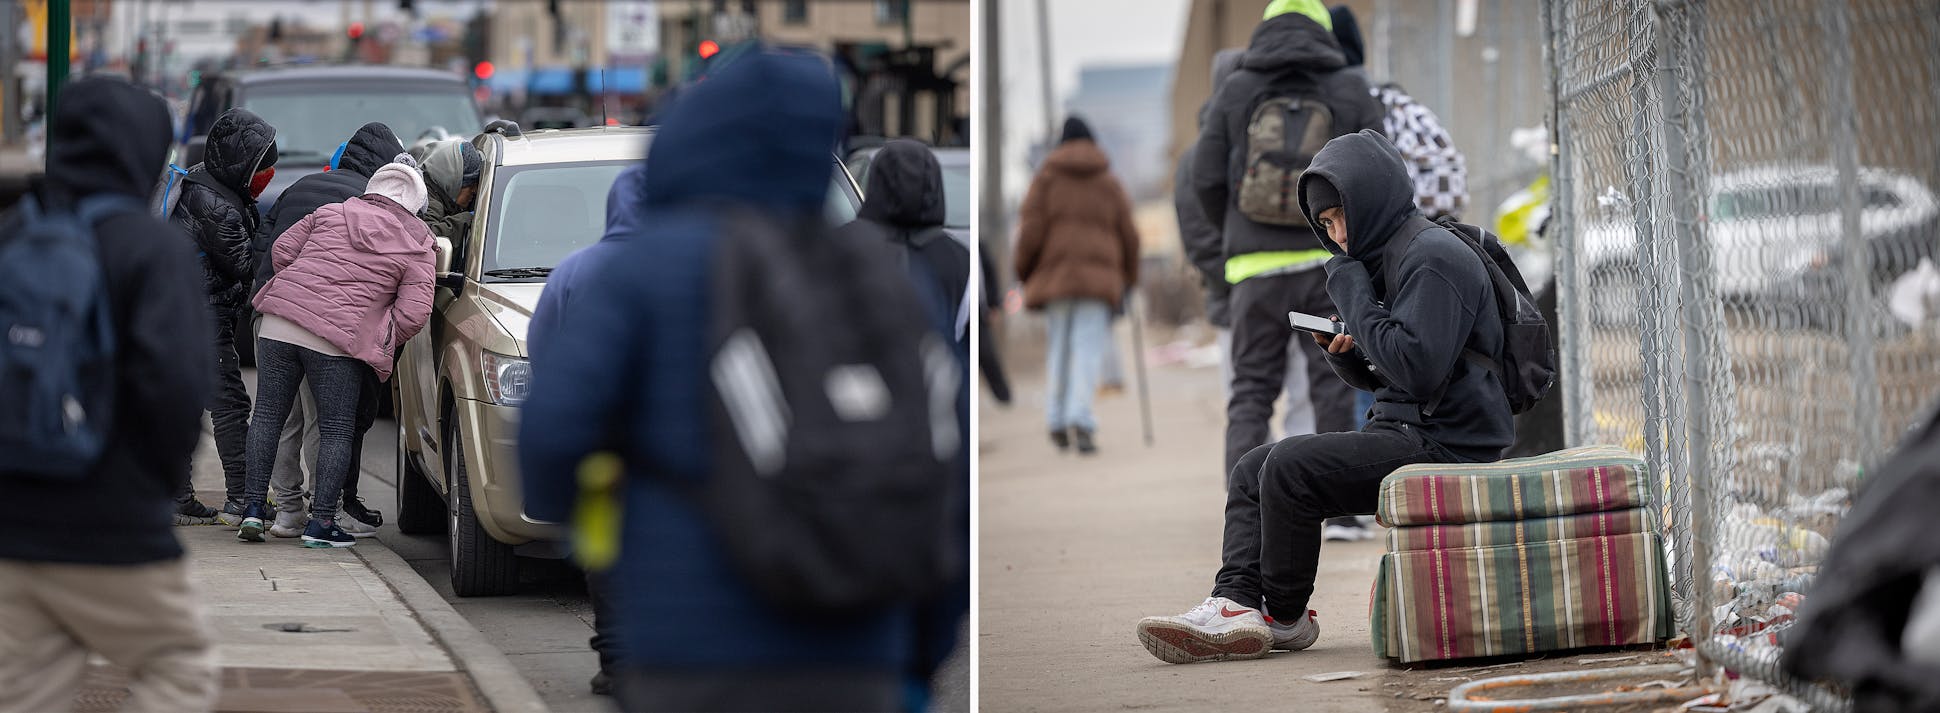 Left: Ecuadorians scrambled to a stopped car, hoping to get chosen for work in Minneapolis on Feb. 9. Right: An Ecuadorian waited on a street corner with hopes of flagging down work in Minneapolis on Feb. 7.